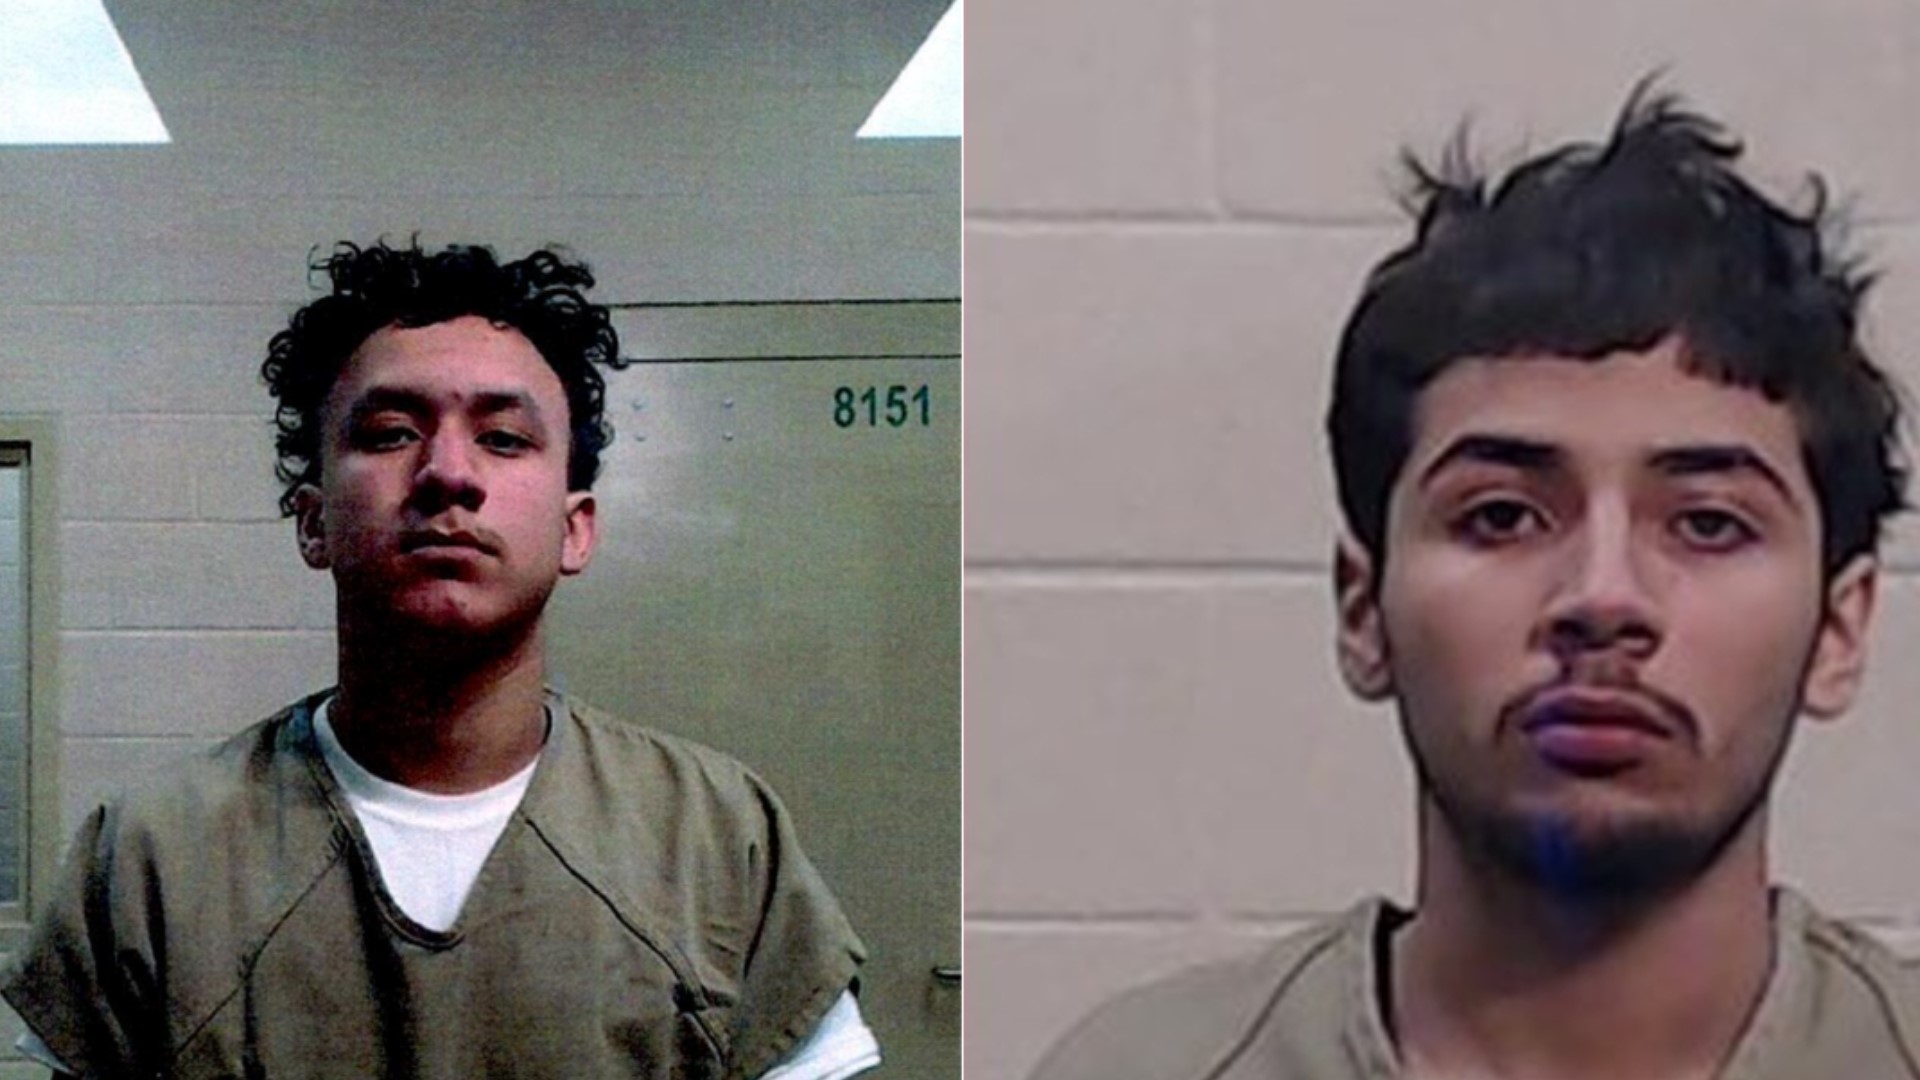 Omar Matthew Gutierrez and Thomas Terrazas have been arrested for the shooting death of a 15-year-old.